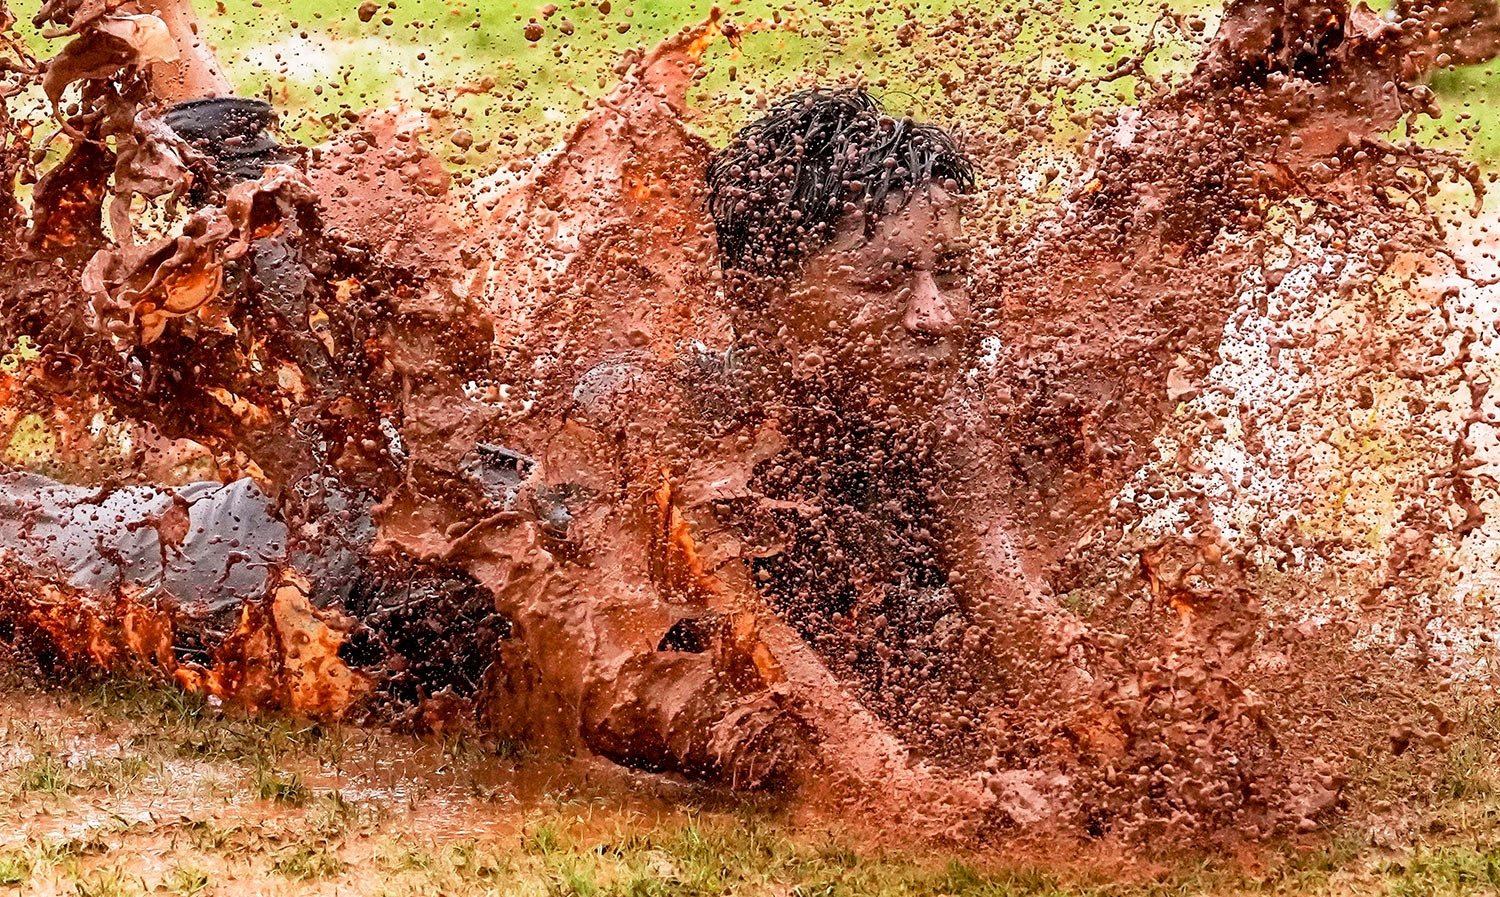  A boy dives in a puddle of muddy water as he enjoys the rains in Mumbai, India, Monday, June 27, 2022. (AP Photo/Rajanish Kakade) 